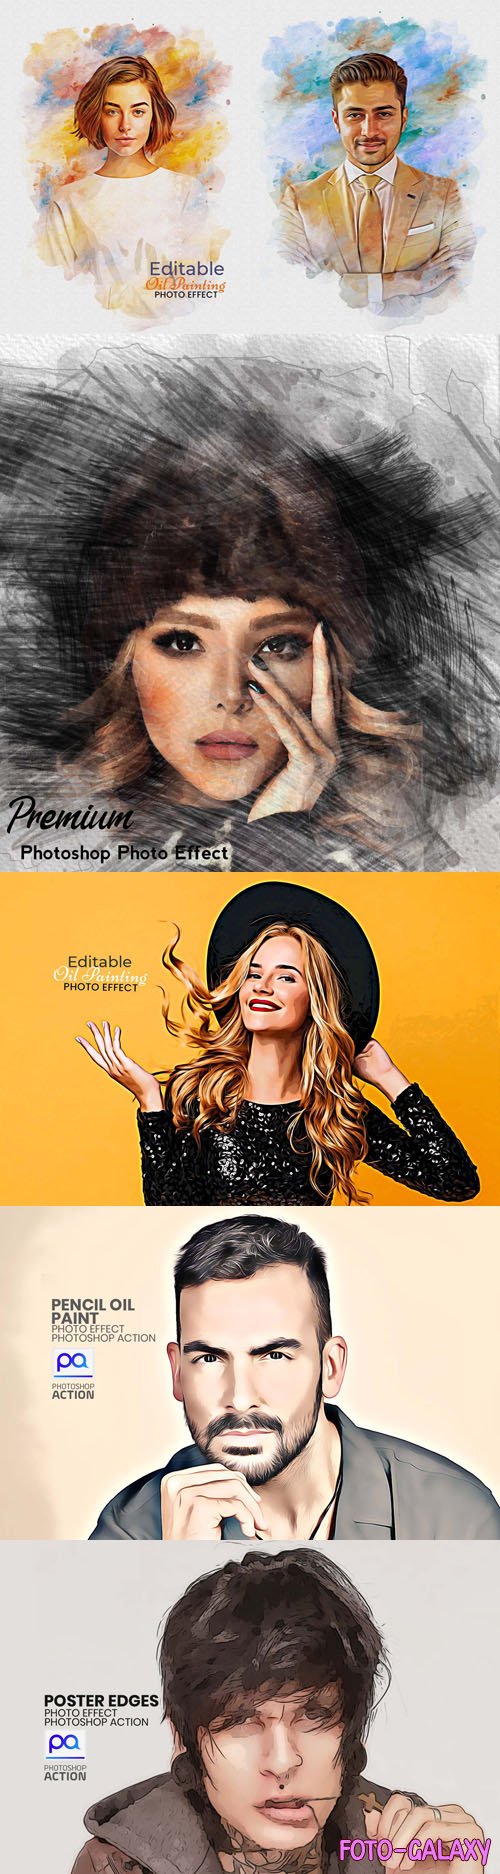 10+ Best Photo Effects & Actions for Photoshop [Vol.8]